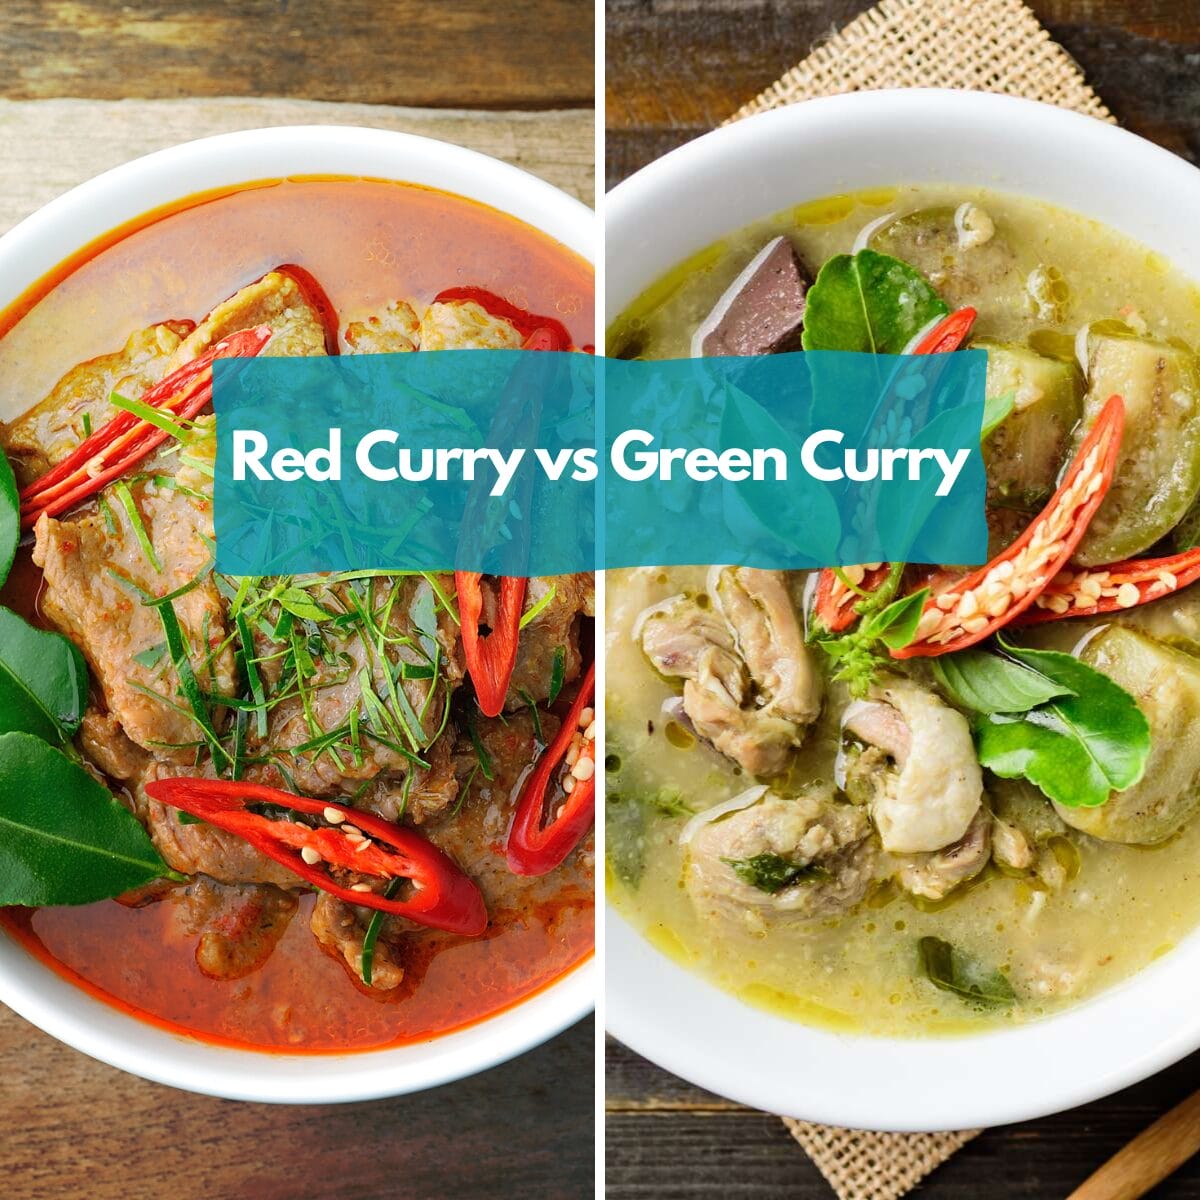 Red curry vs green curry